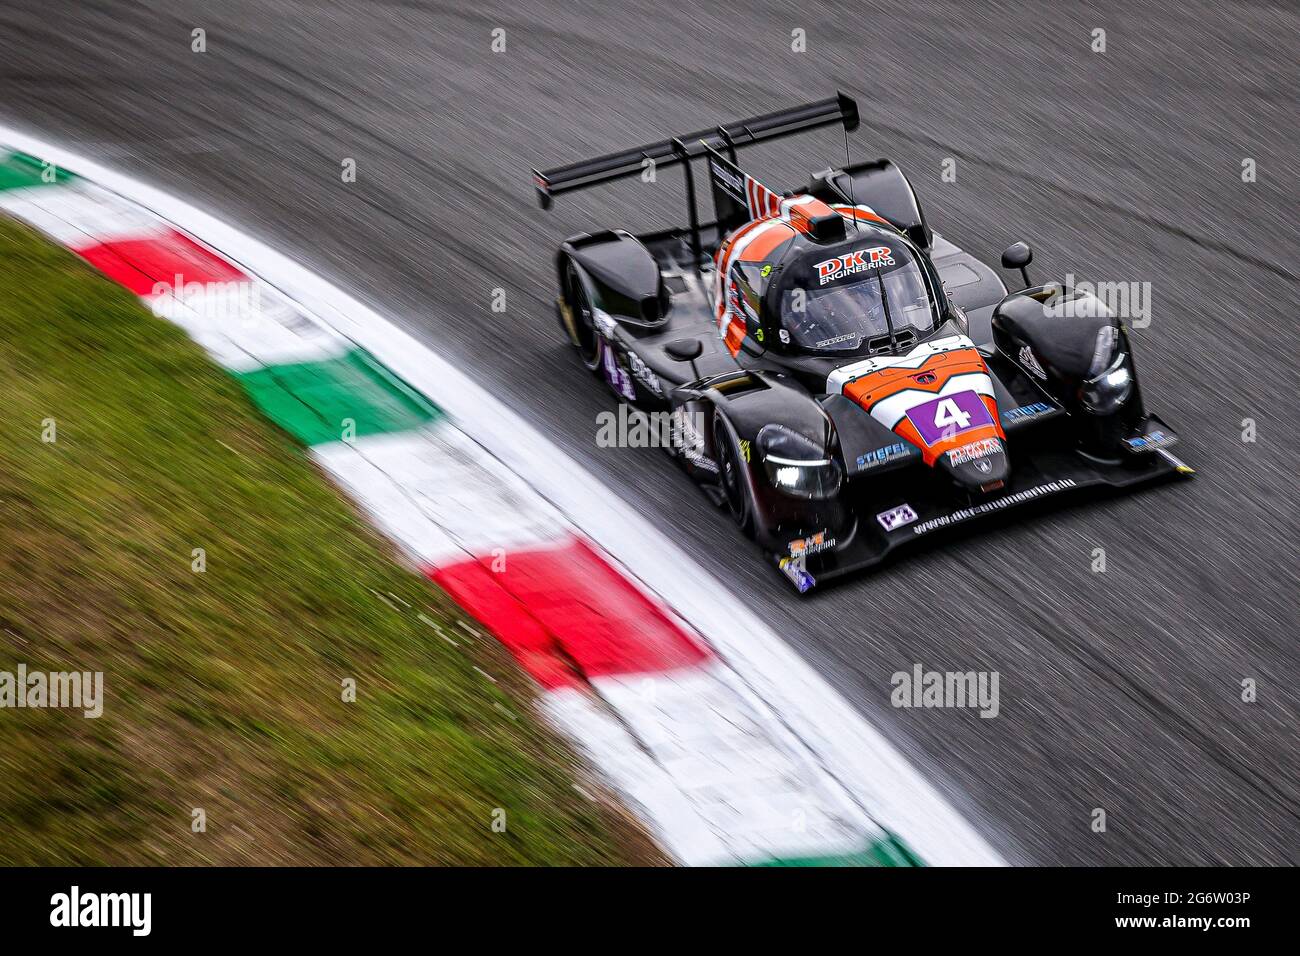 04 Horr Laurents (deu), Berg Alain (lux), DKR Engineering, Duqueine M30 -  D08 - Nissan, action during the 2021 4 Hours of Monza, 4th round of the  2021 European Le Mans Series